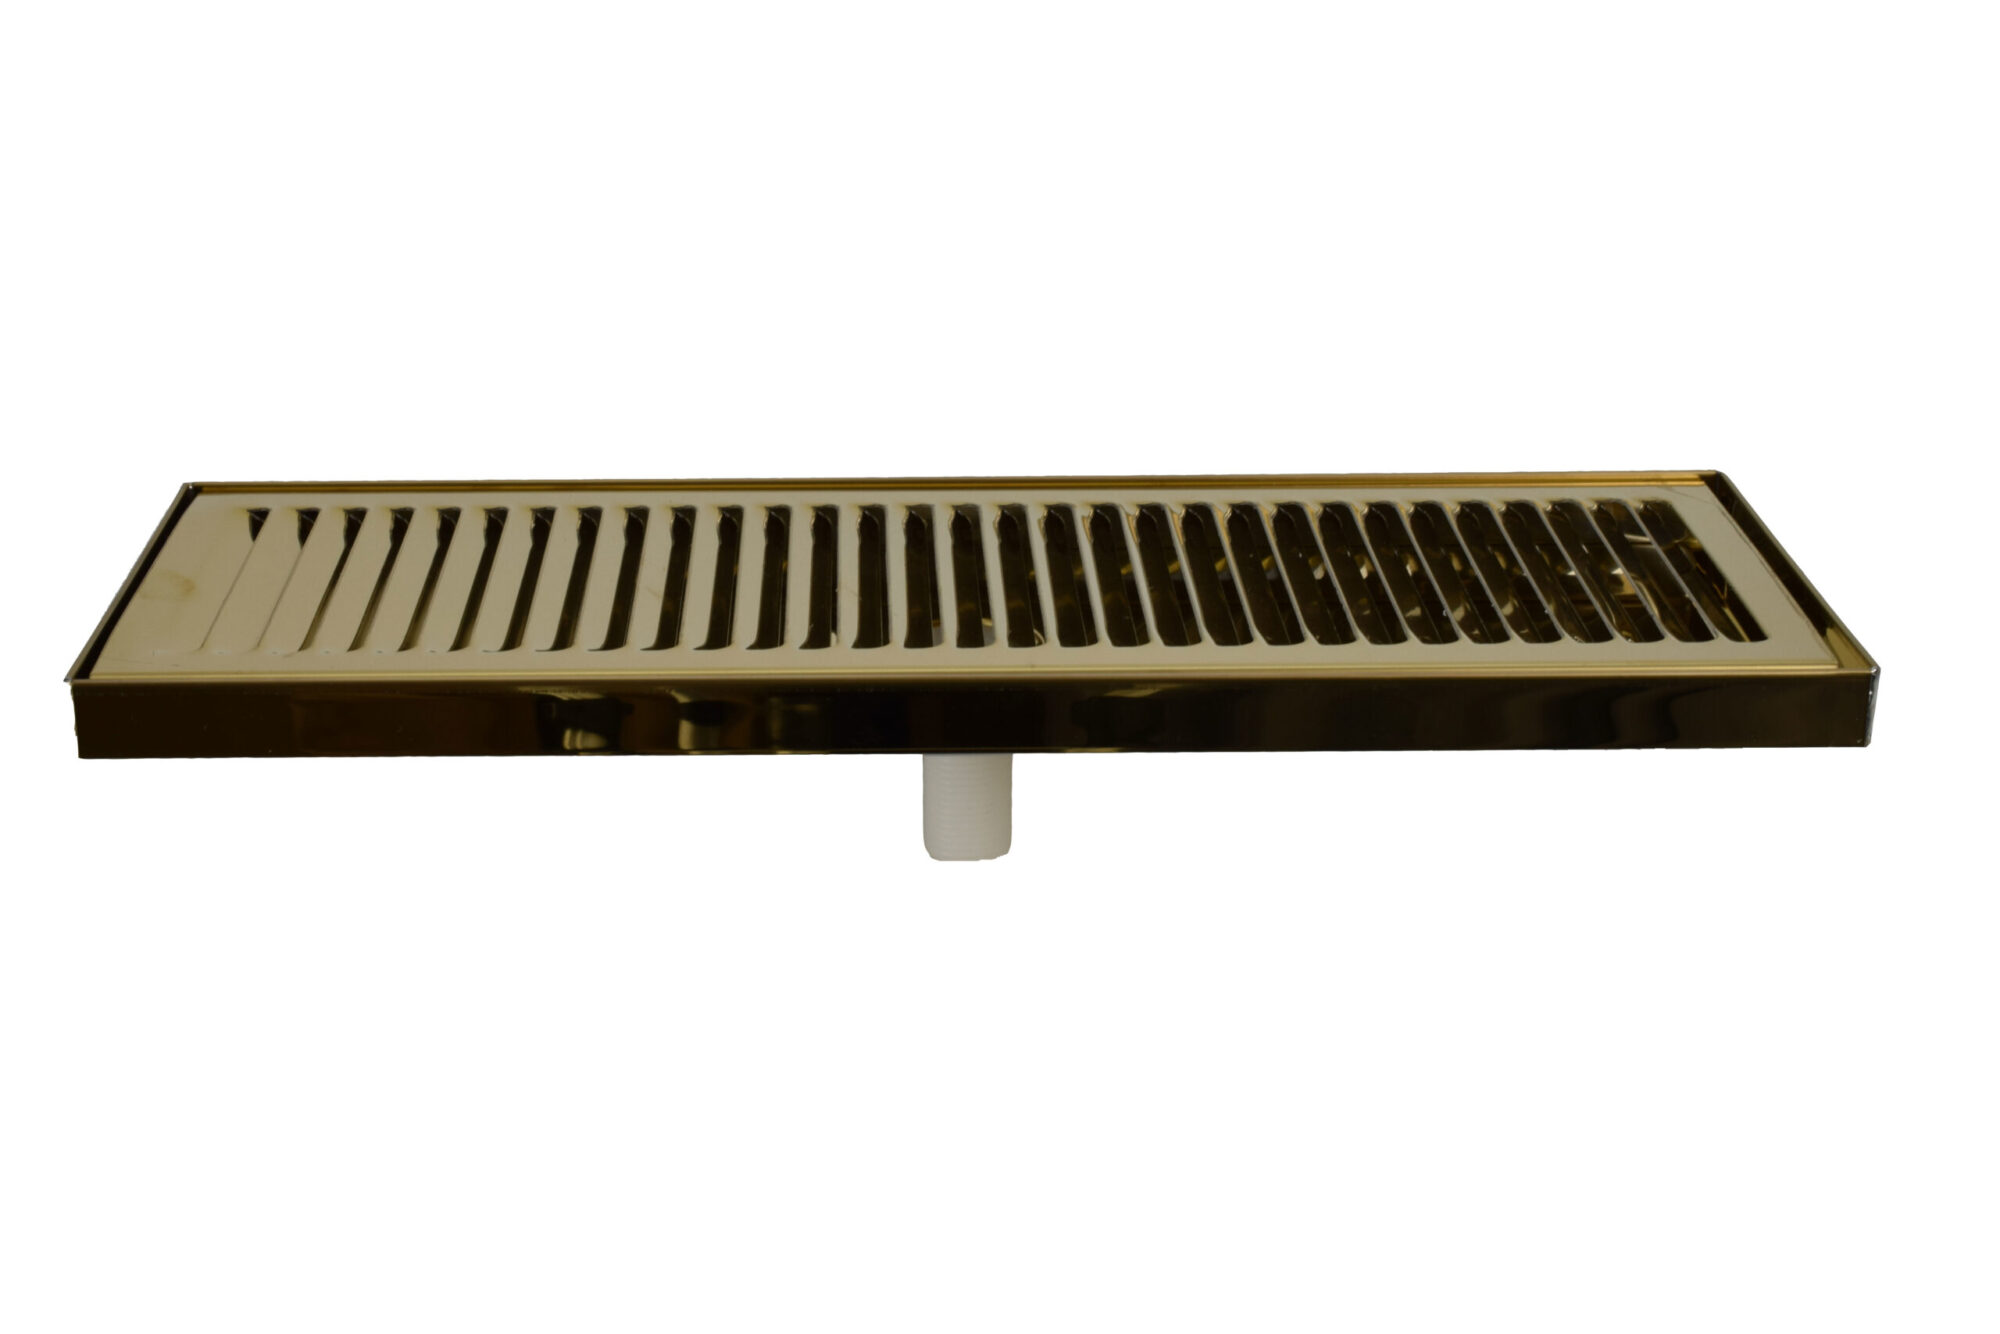 616LBM PVD Brass Counter Top Tray with Drain and PVD Brass Grid - 24"L x 5 3/8"W x 3/4"D